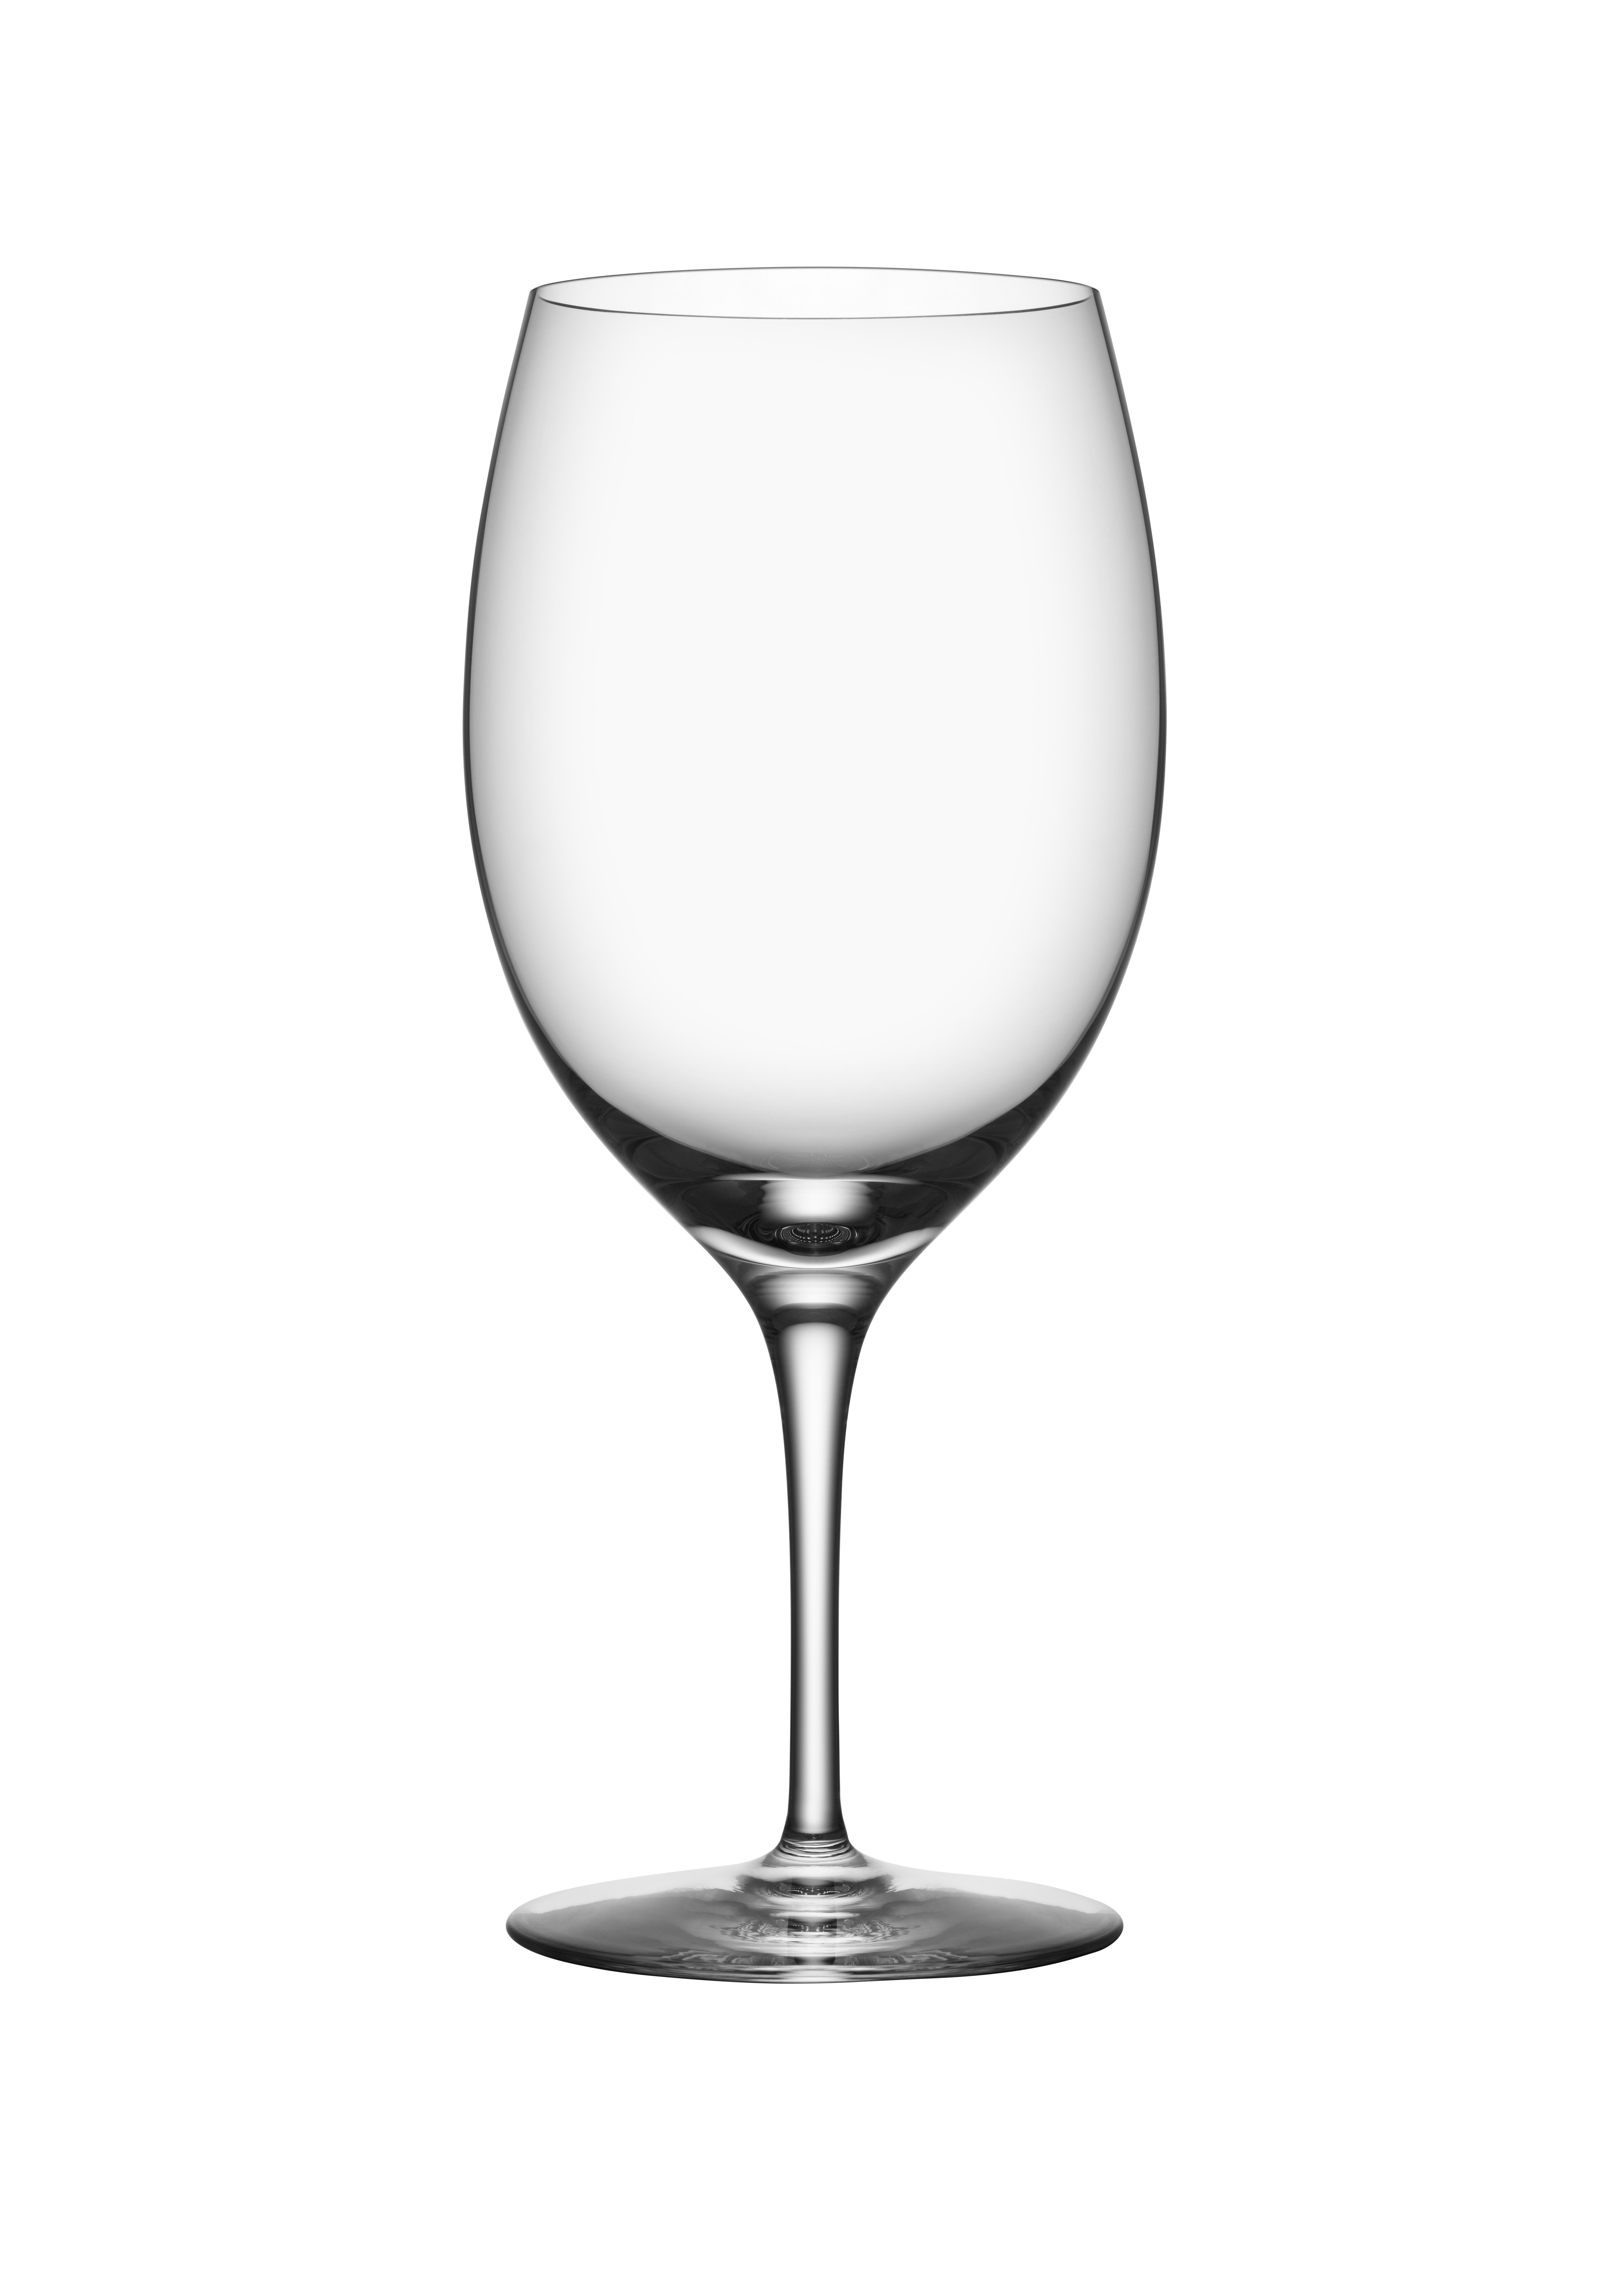 Premier Cabernet from Orrefors, which holds 24 oz, is designed to emphasize the flavors and aromas of varietal wines, specifically Cabernet Sauvignon. The wine glass is mouth-blown with a handmade stem and is an elegant complement to any table